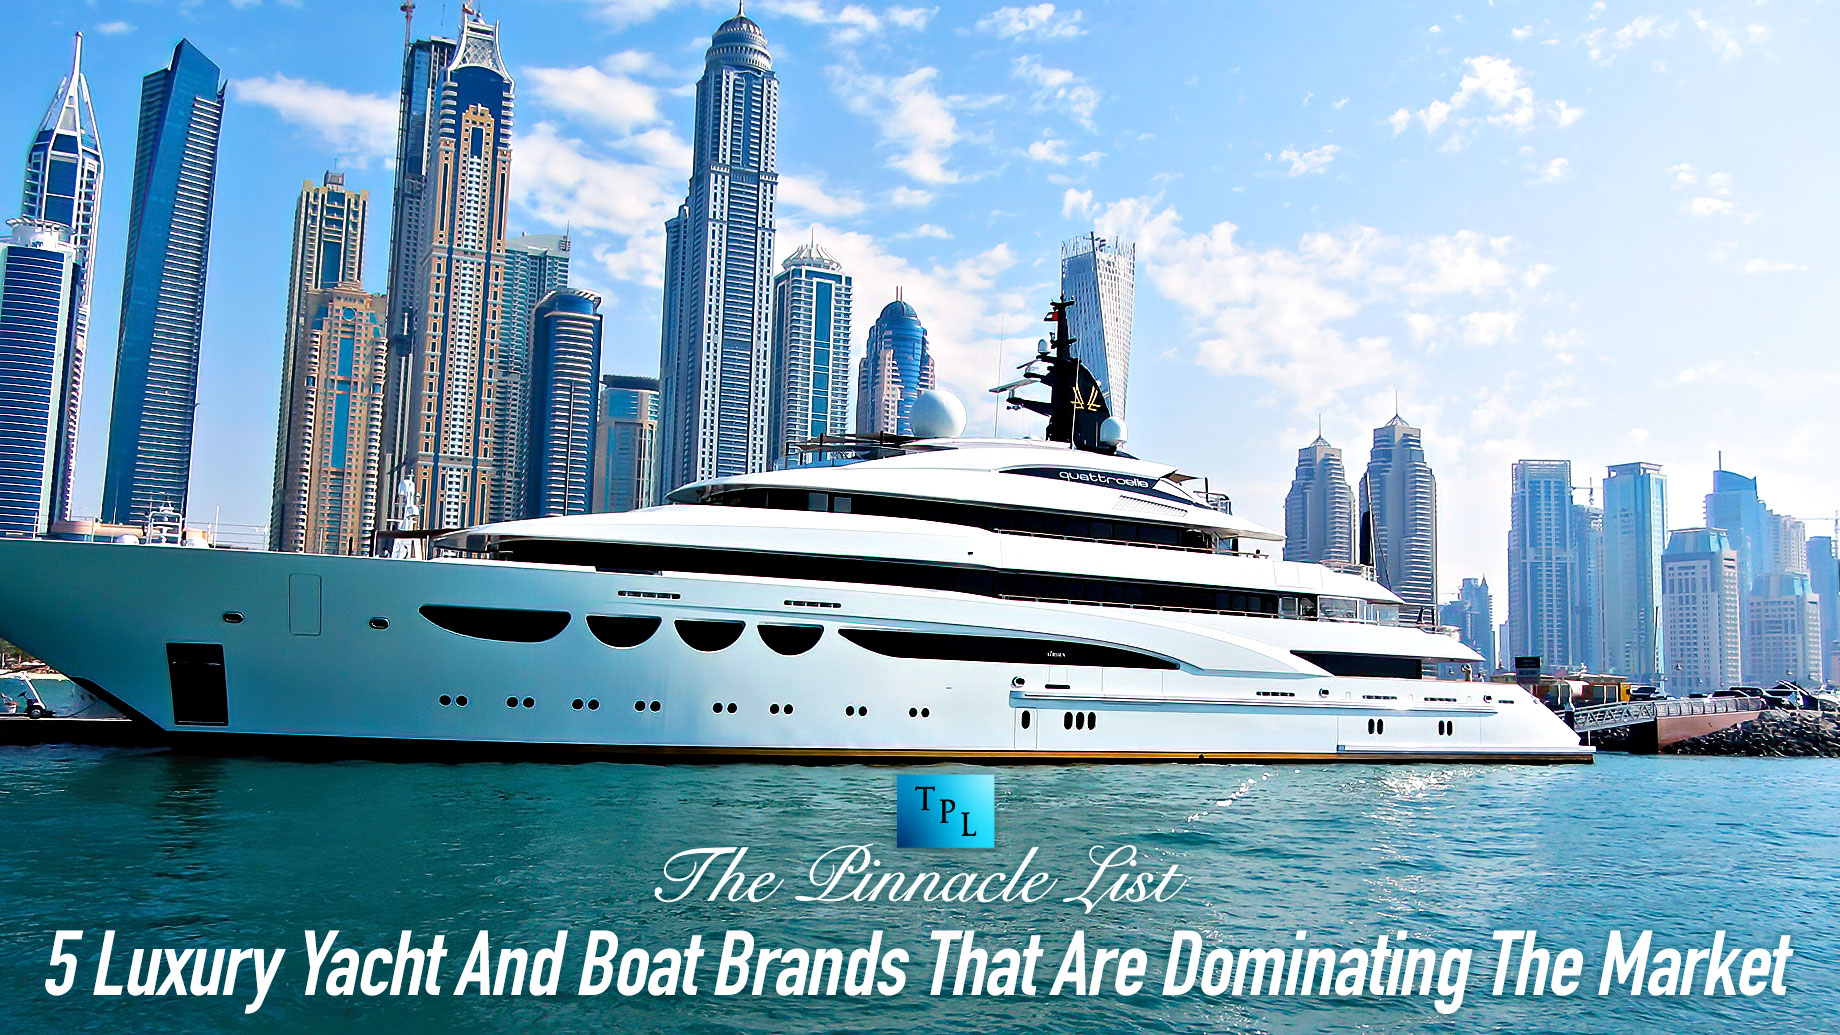 5 Luxury Yacht And Boat Brands That Are Dominating The Market